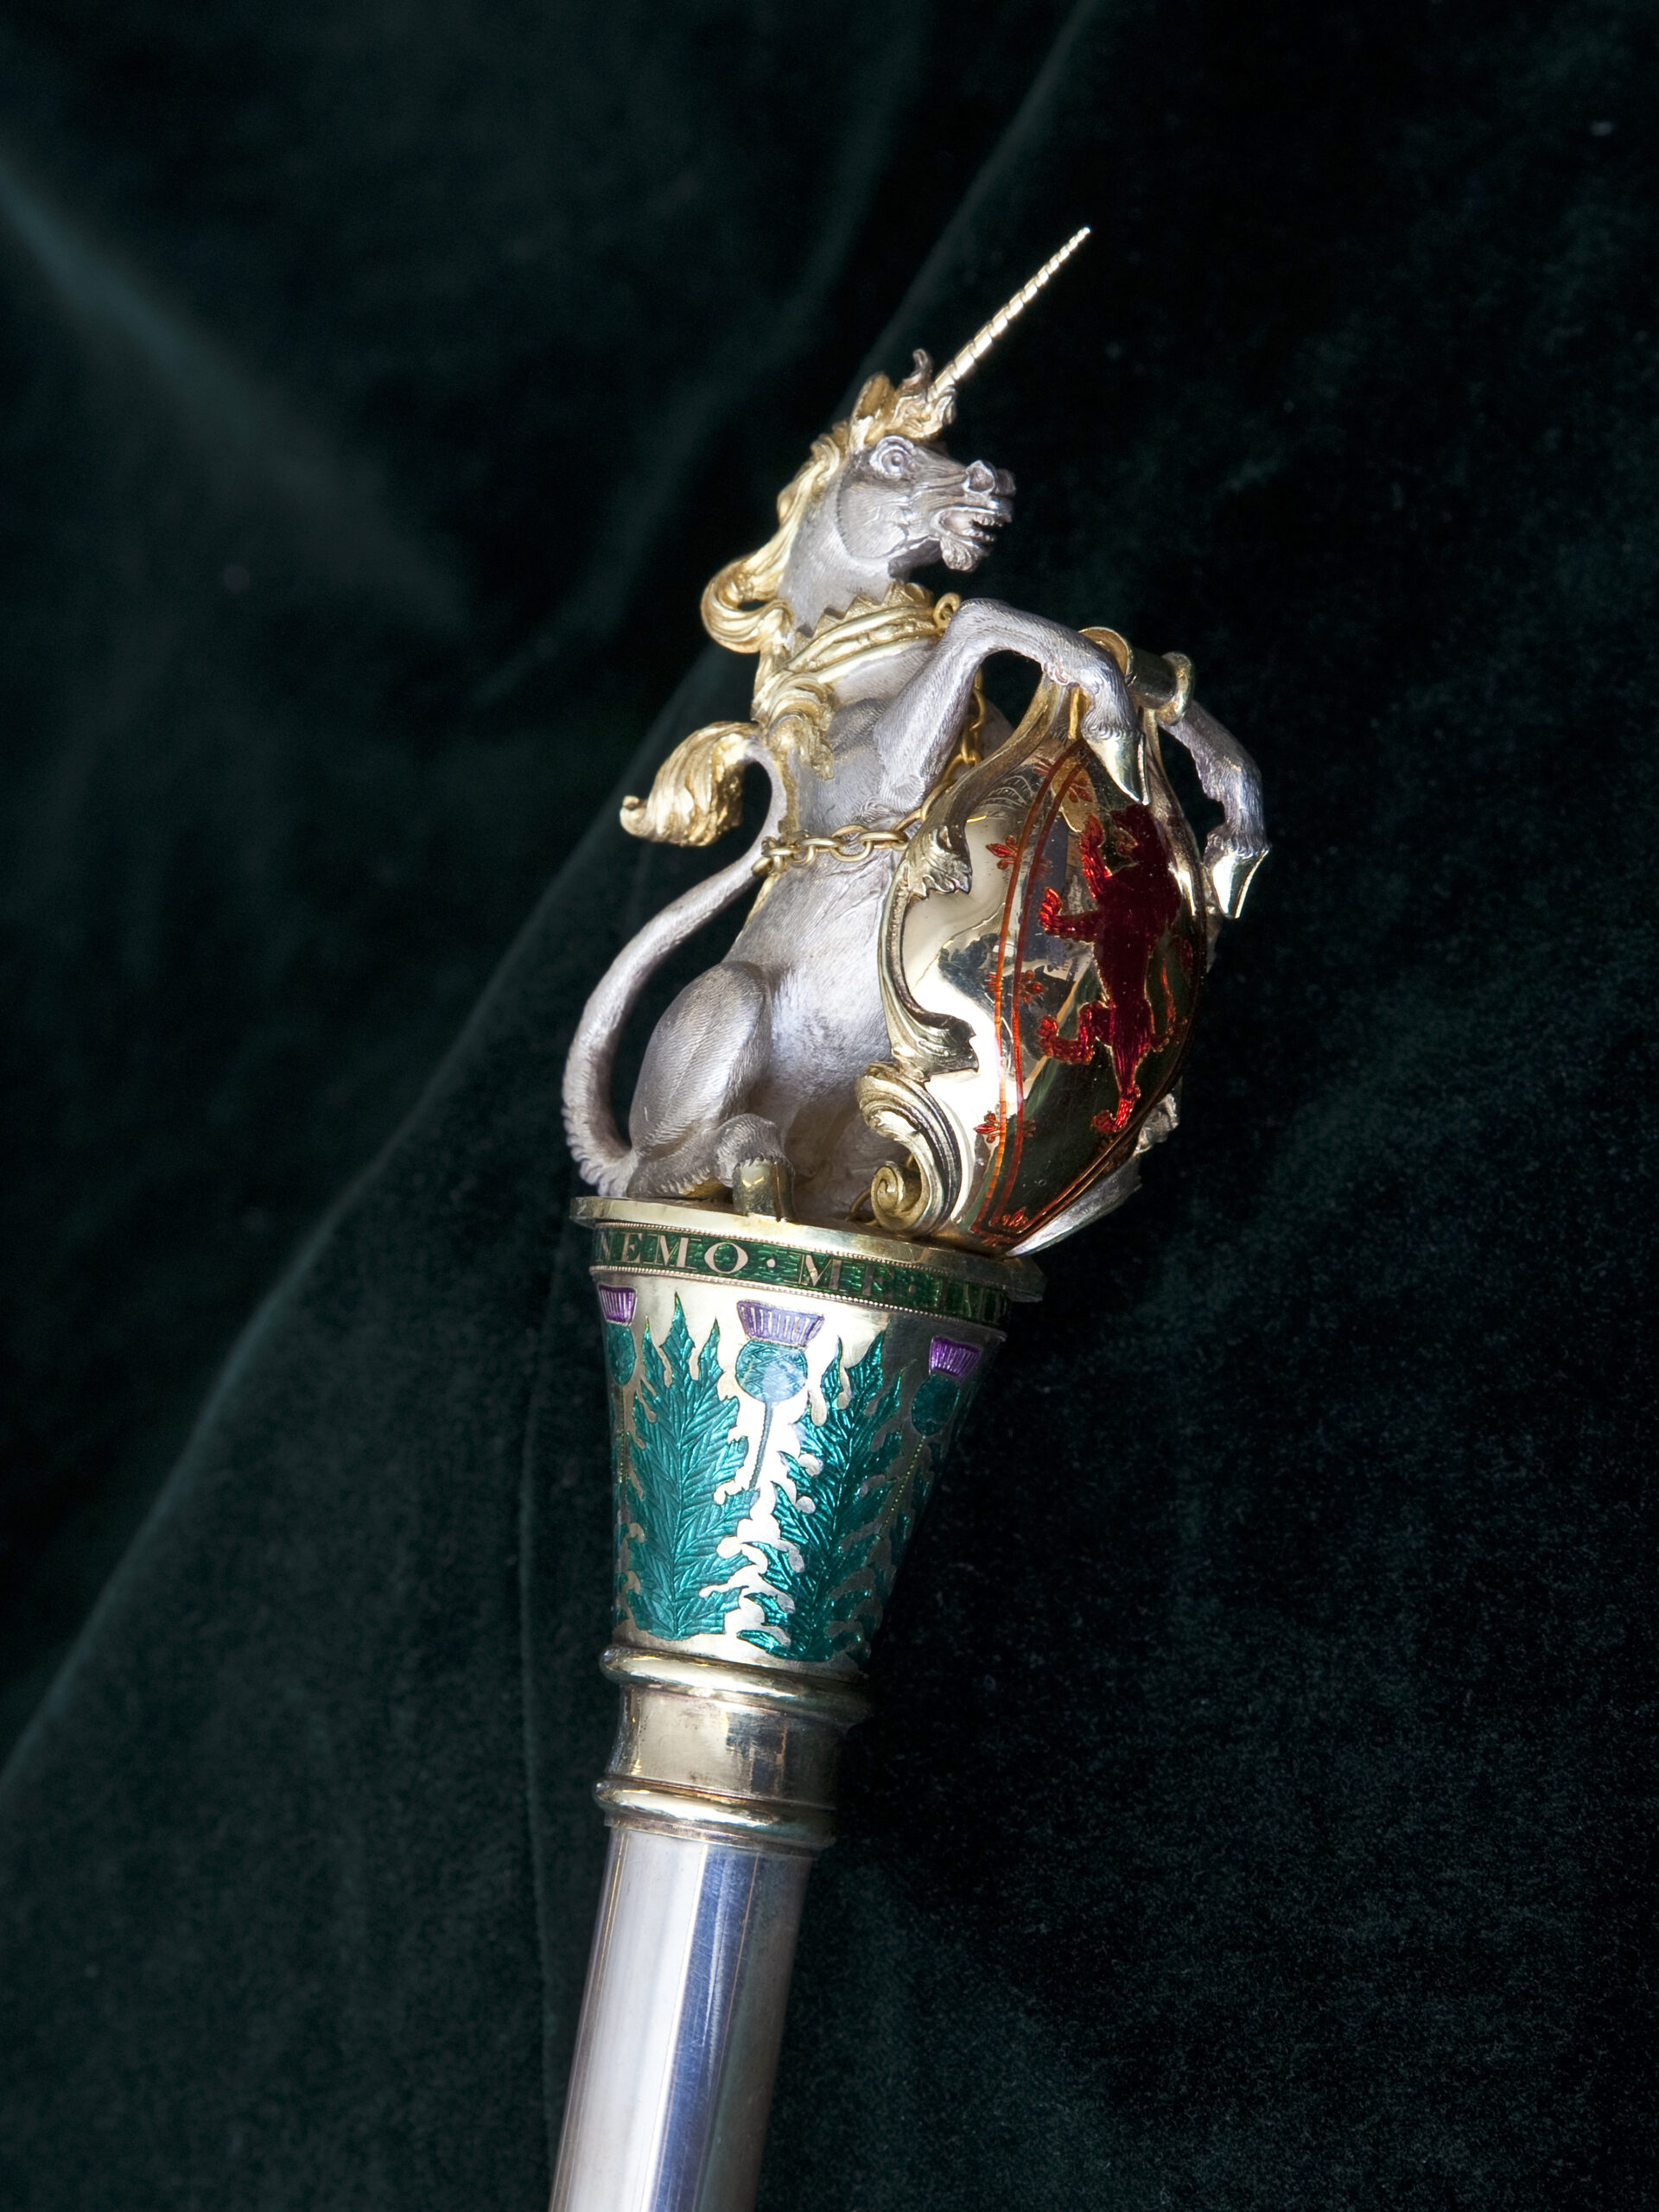 A regal silver unicorn features atop the 19th century ceremonial rod or wand, part of the regalia of the Usher of the White Rod reproduced by Permission of the Trustees and Factor and Commissioner of the Walker Trust.  Photography by National Museums Scotland